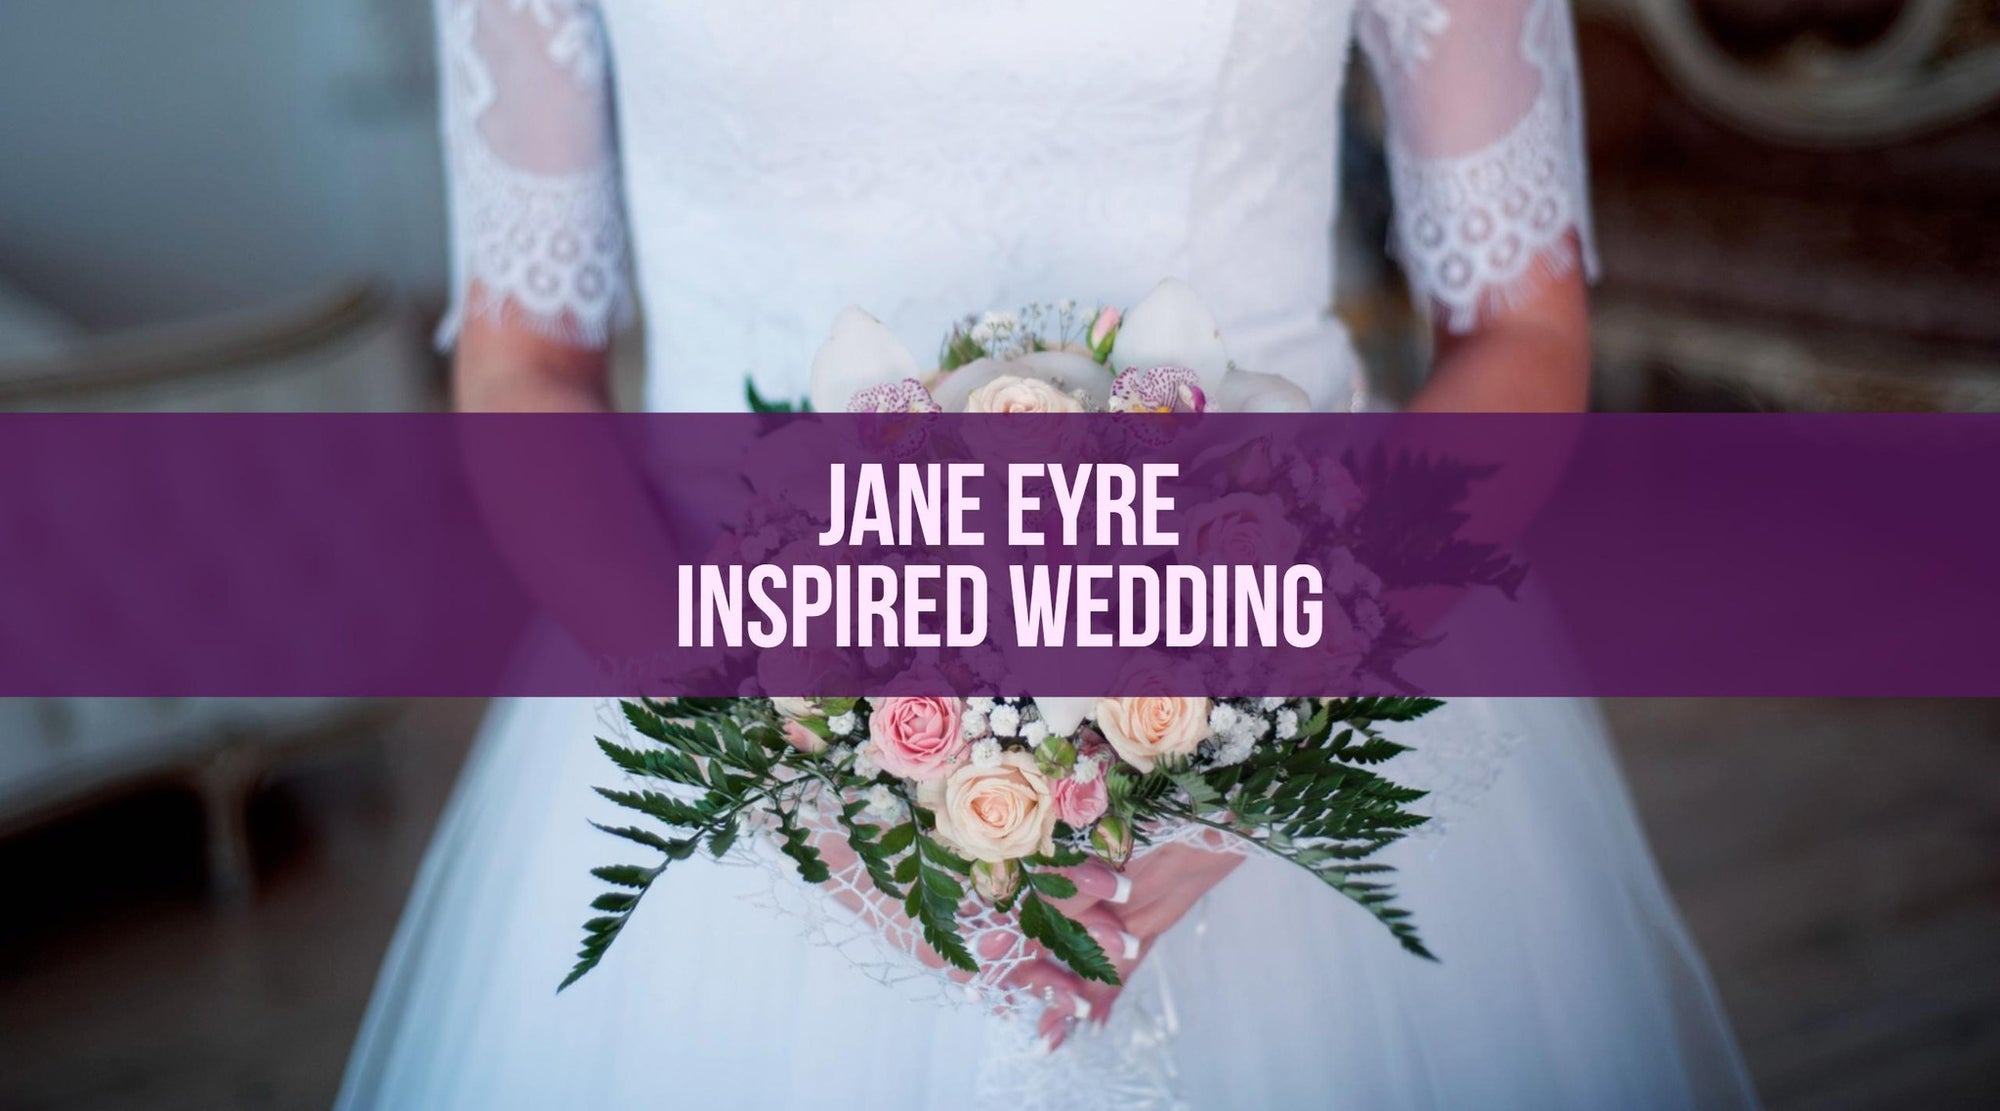 3 Key Elements in a Jane Eyre-Inspired Wedding